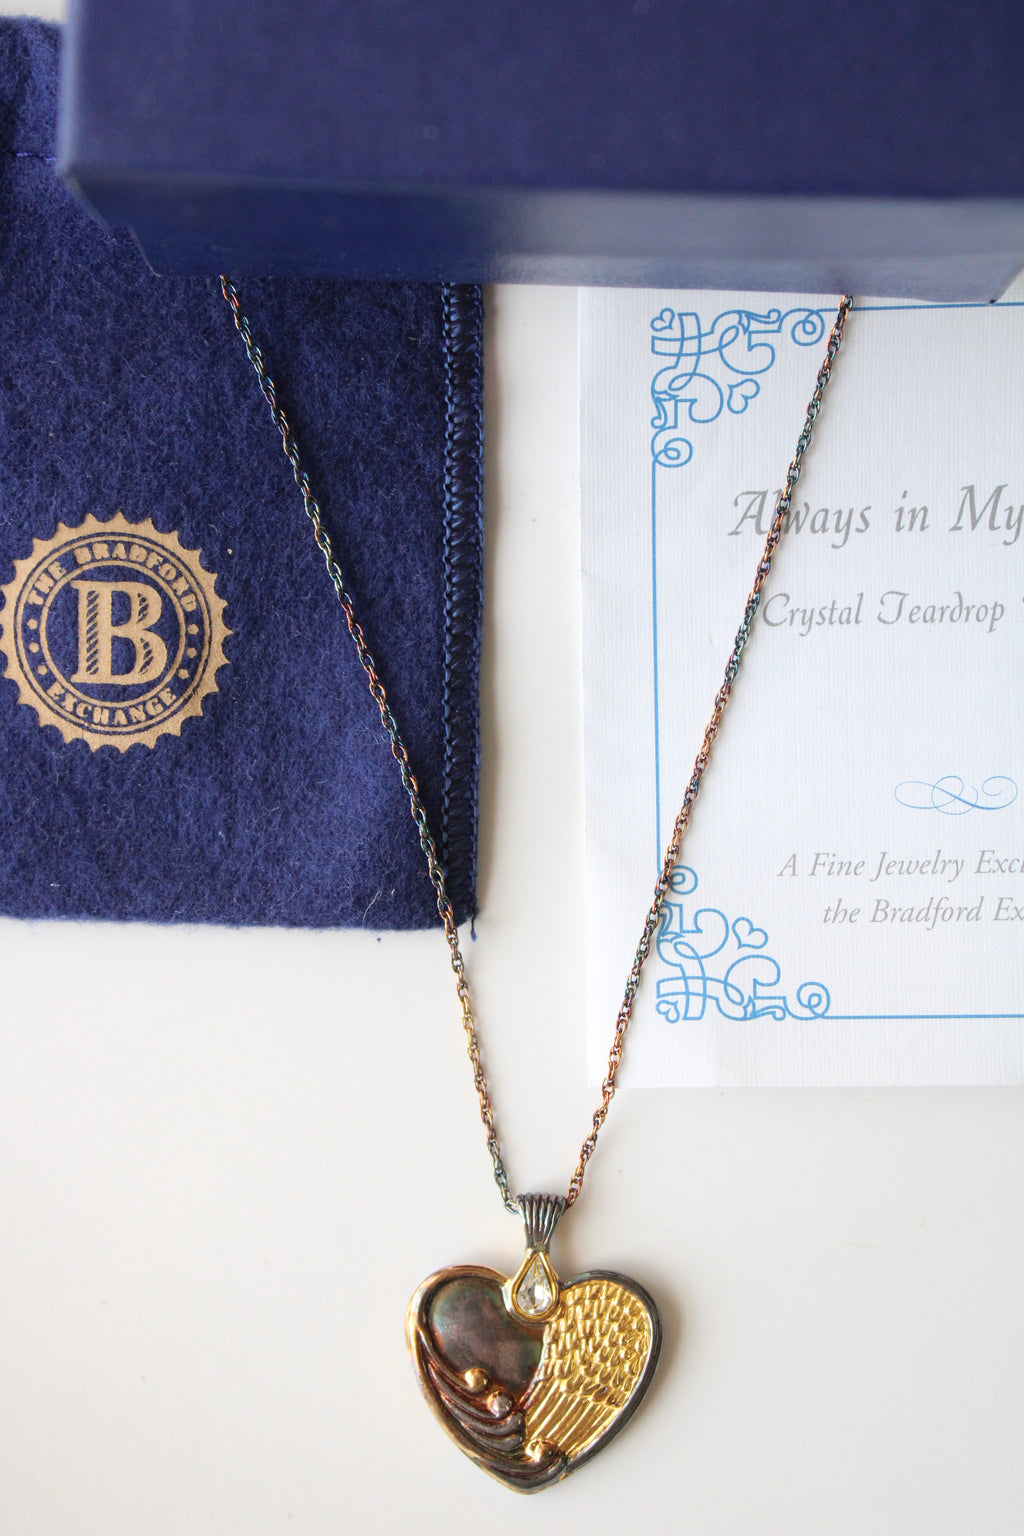 The Bradford Exchange 925 Stamped Heart "If Tears Could Build A Stairway" Necklace